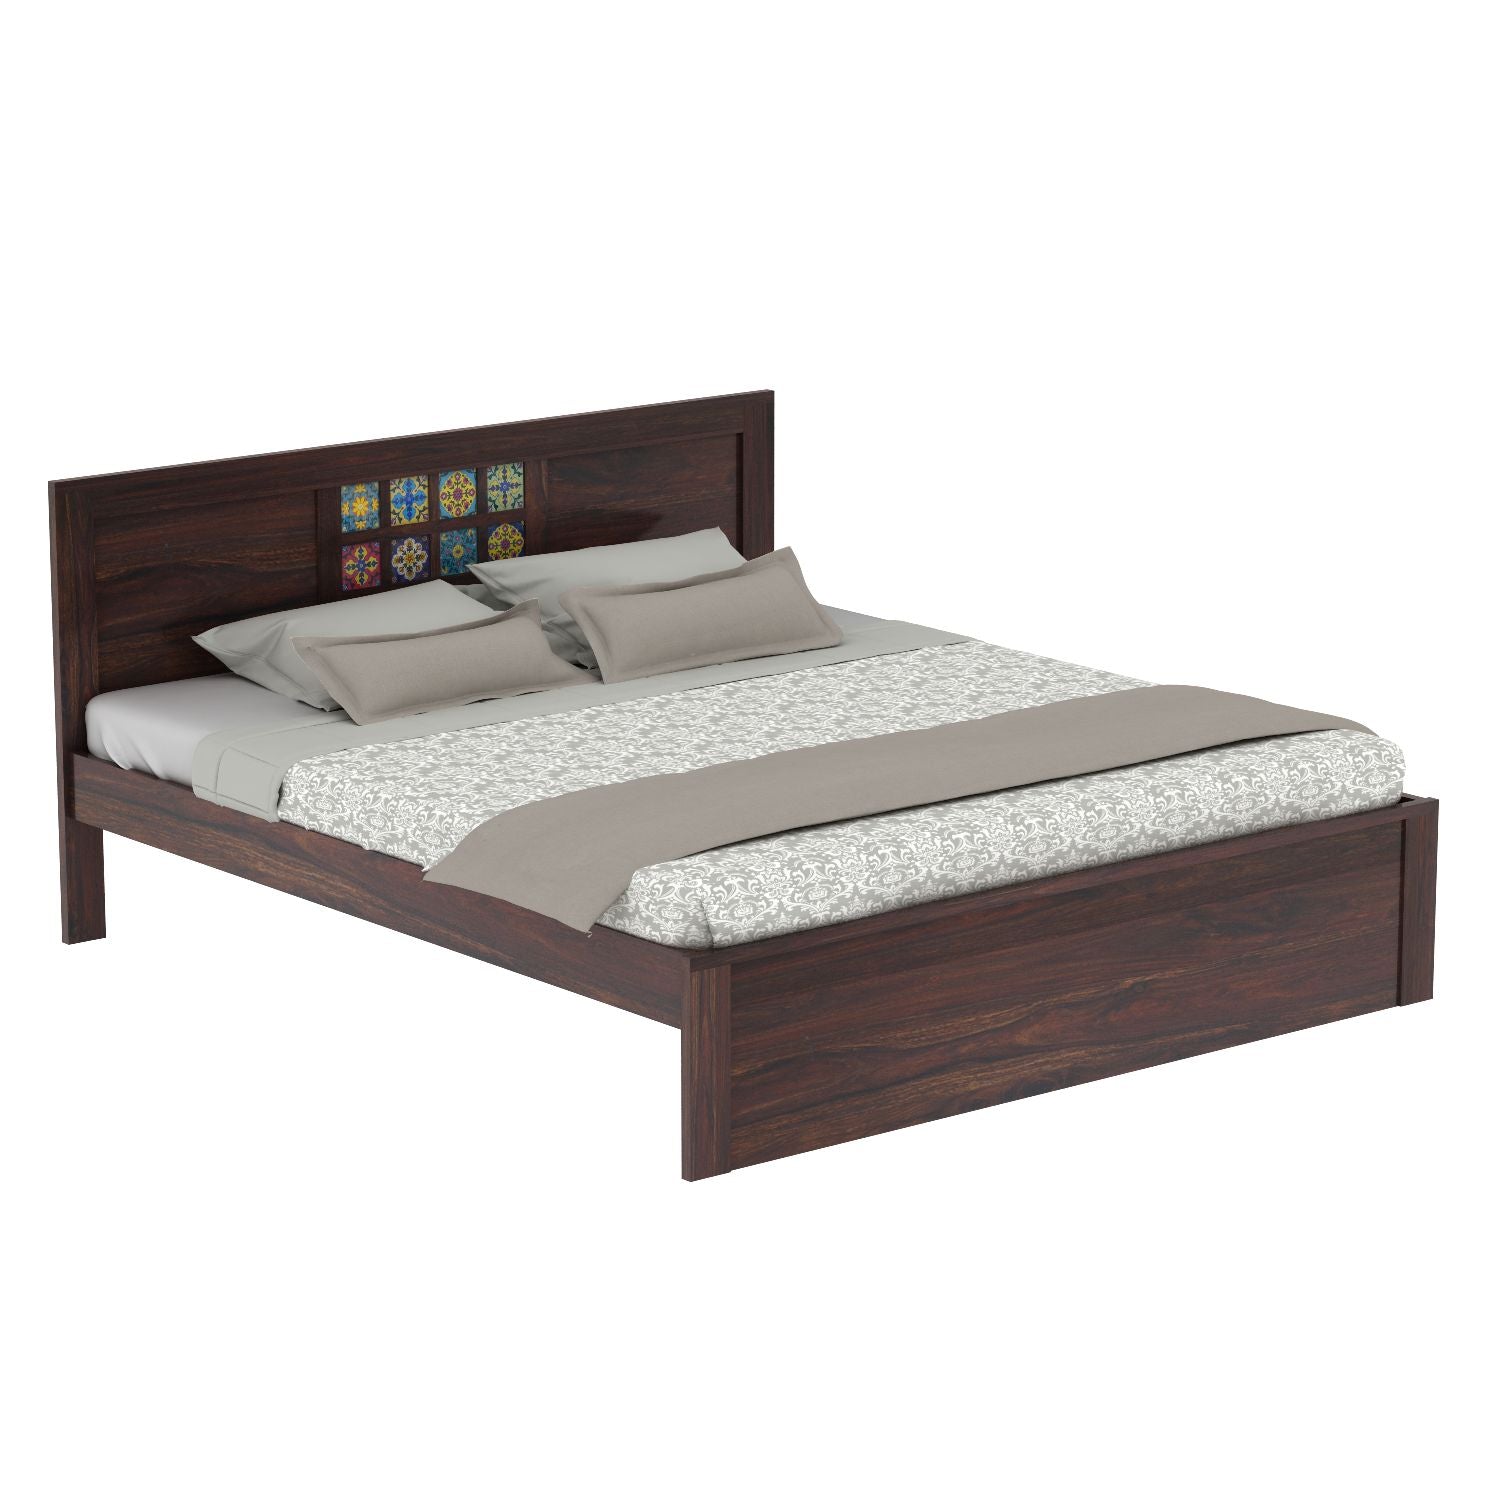 Dotwork Solid Sheesham Wood Bed Without Storage (Queen Size, Walnut Finish)